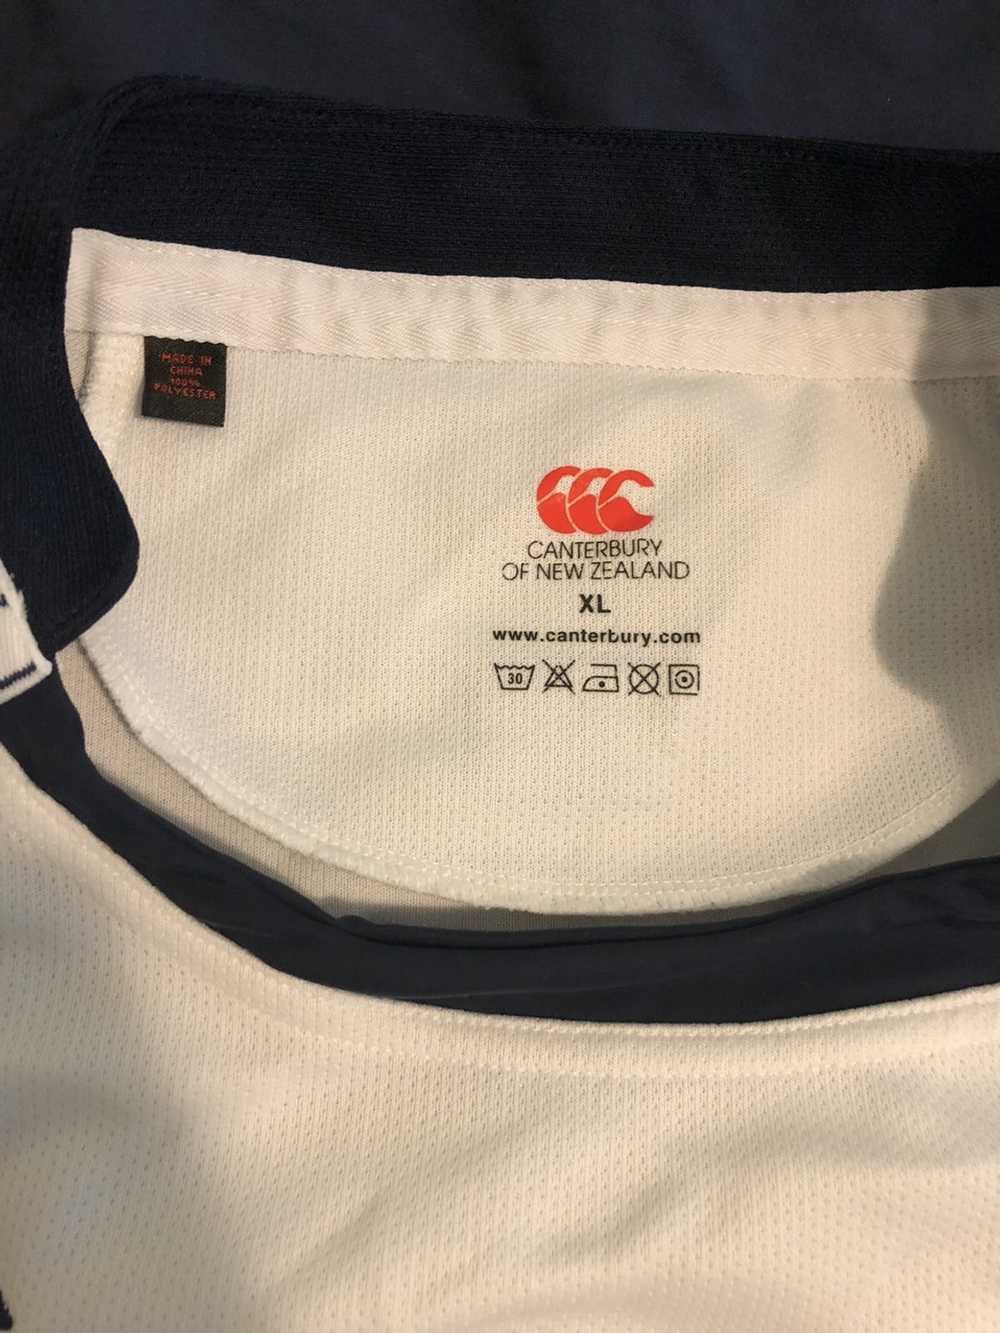 Canterbury Of New Zealand Scotland rugby jersey - image 3